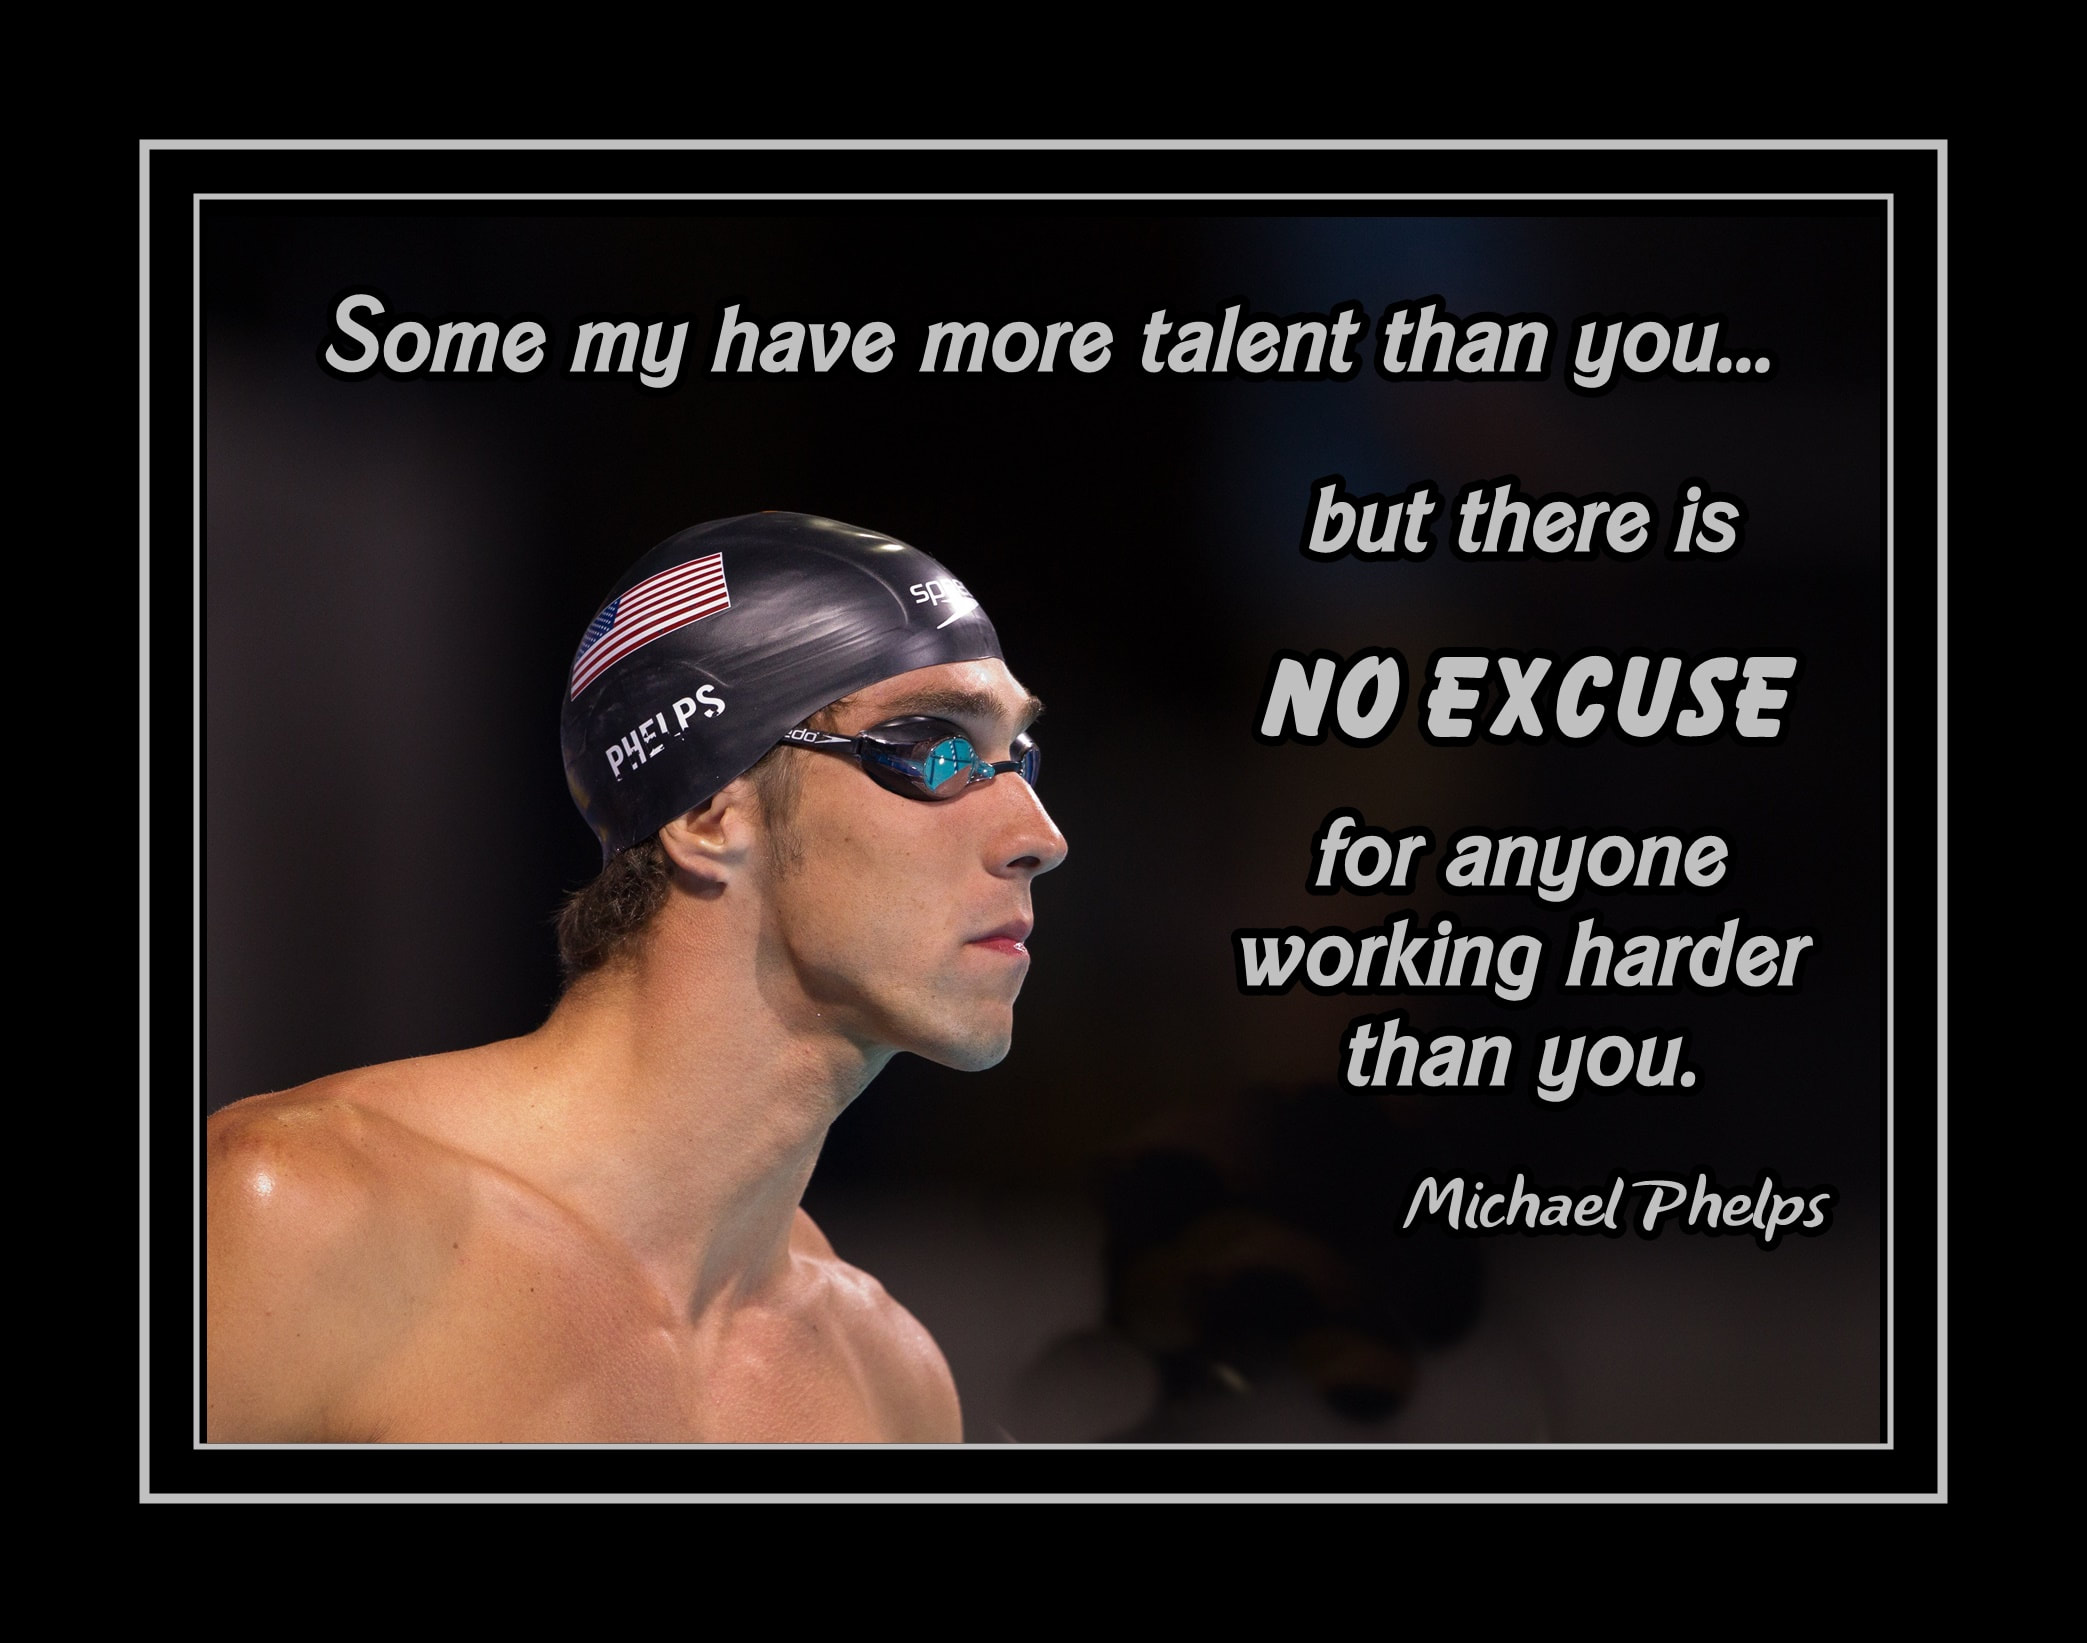 Michael Phelps American Swimmer Motivation Inspiration Quote Poster Photo B&W